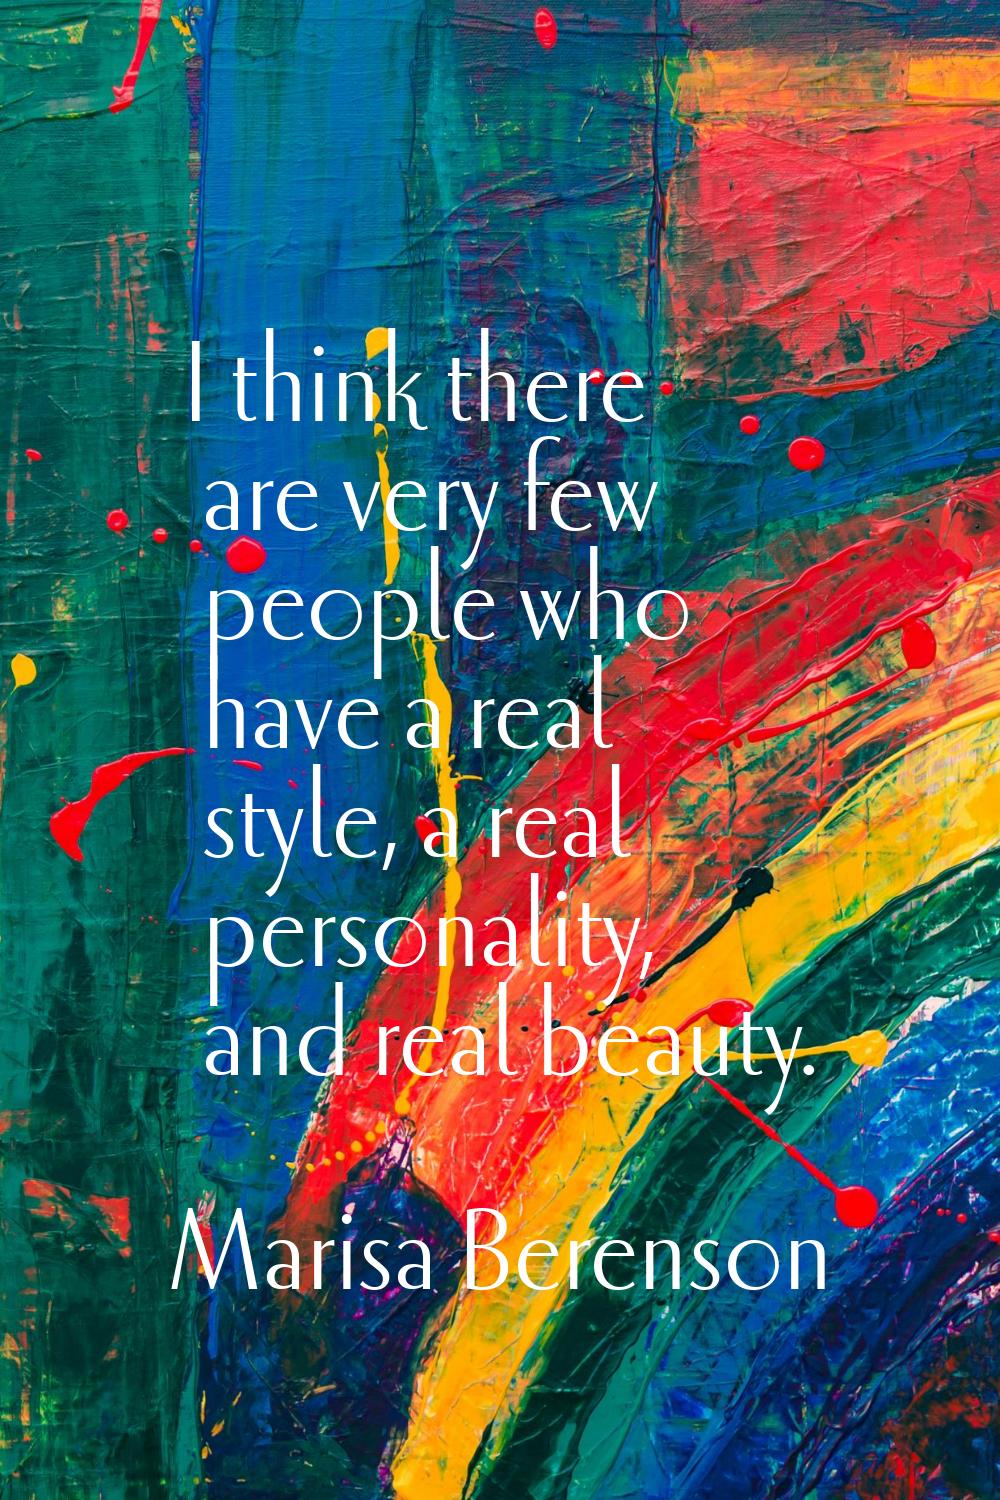 I think there are very few people who have a real style, a real personality, and real beauty.